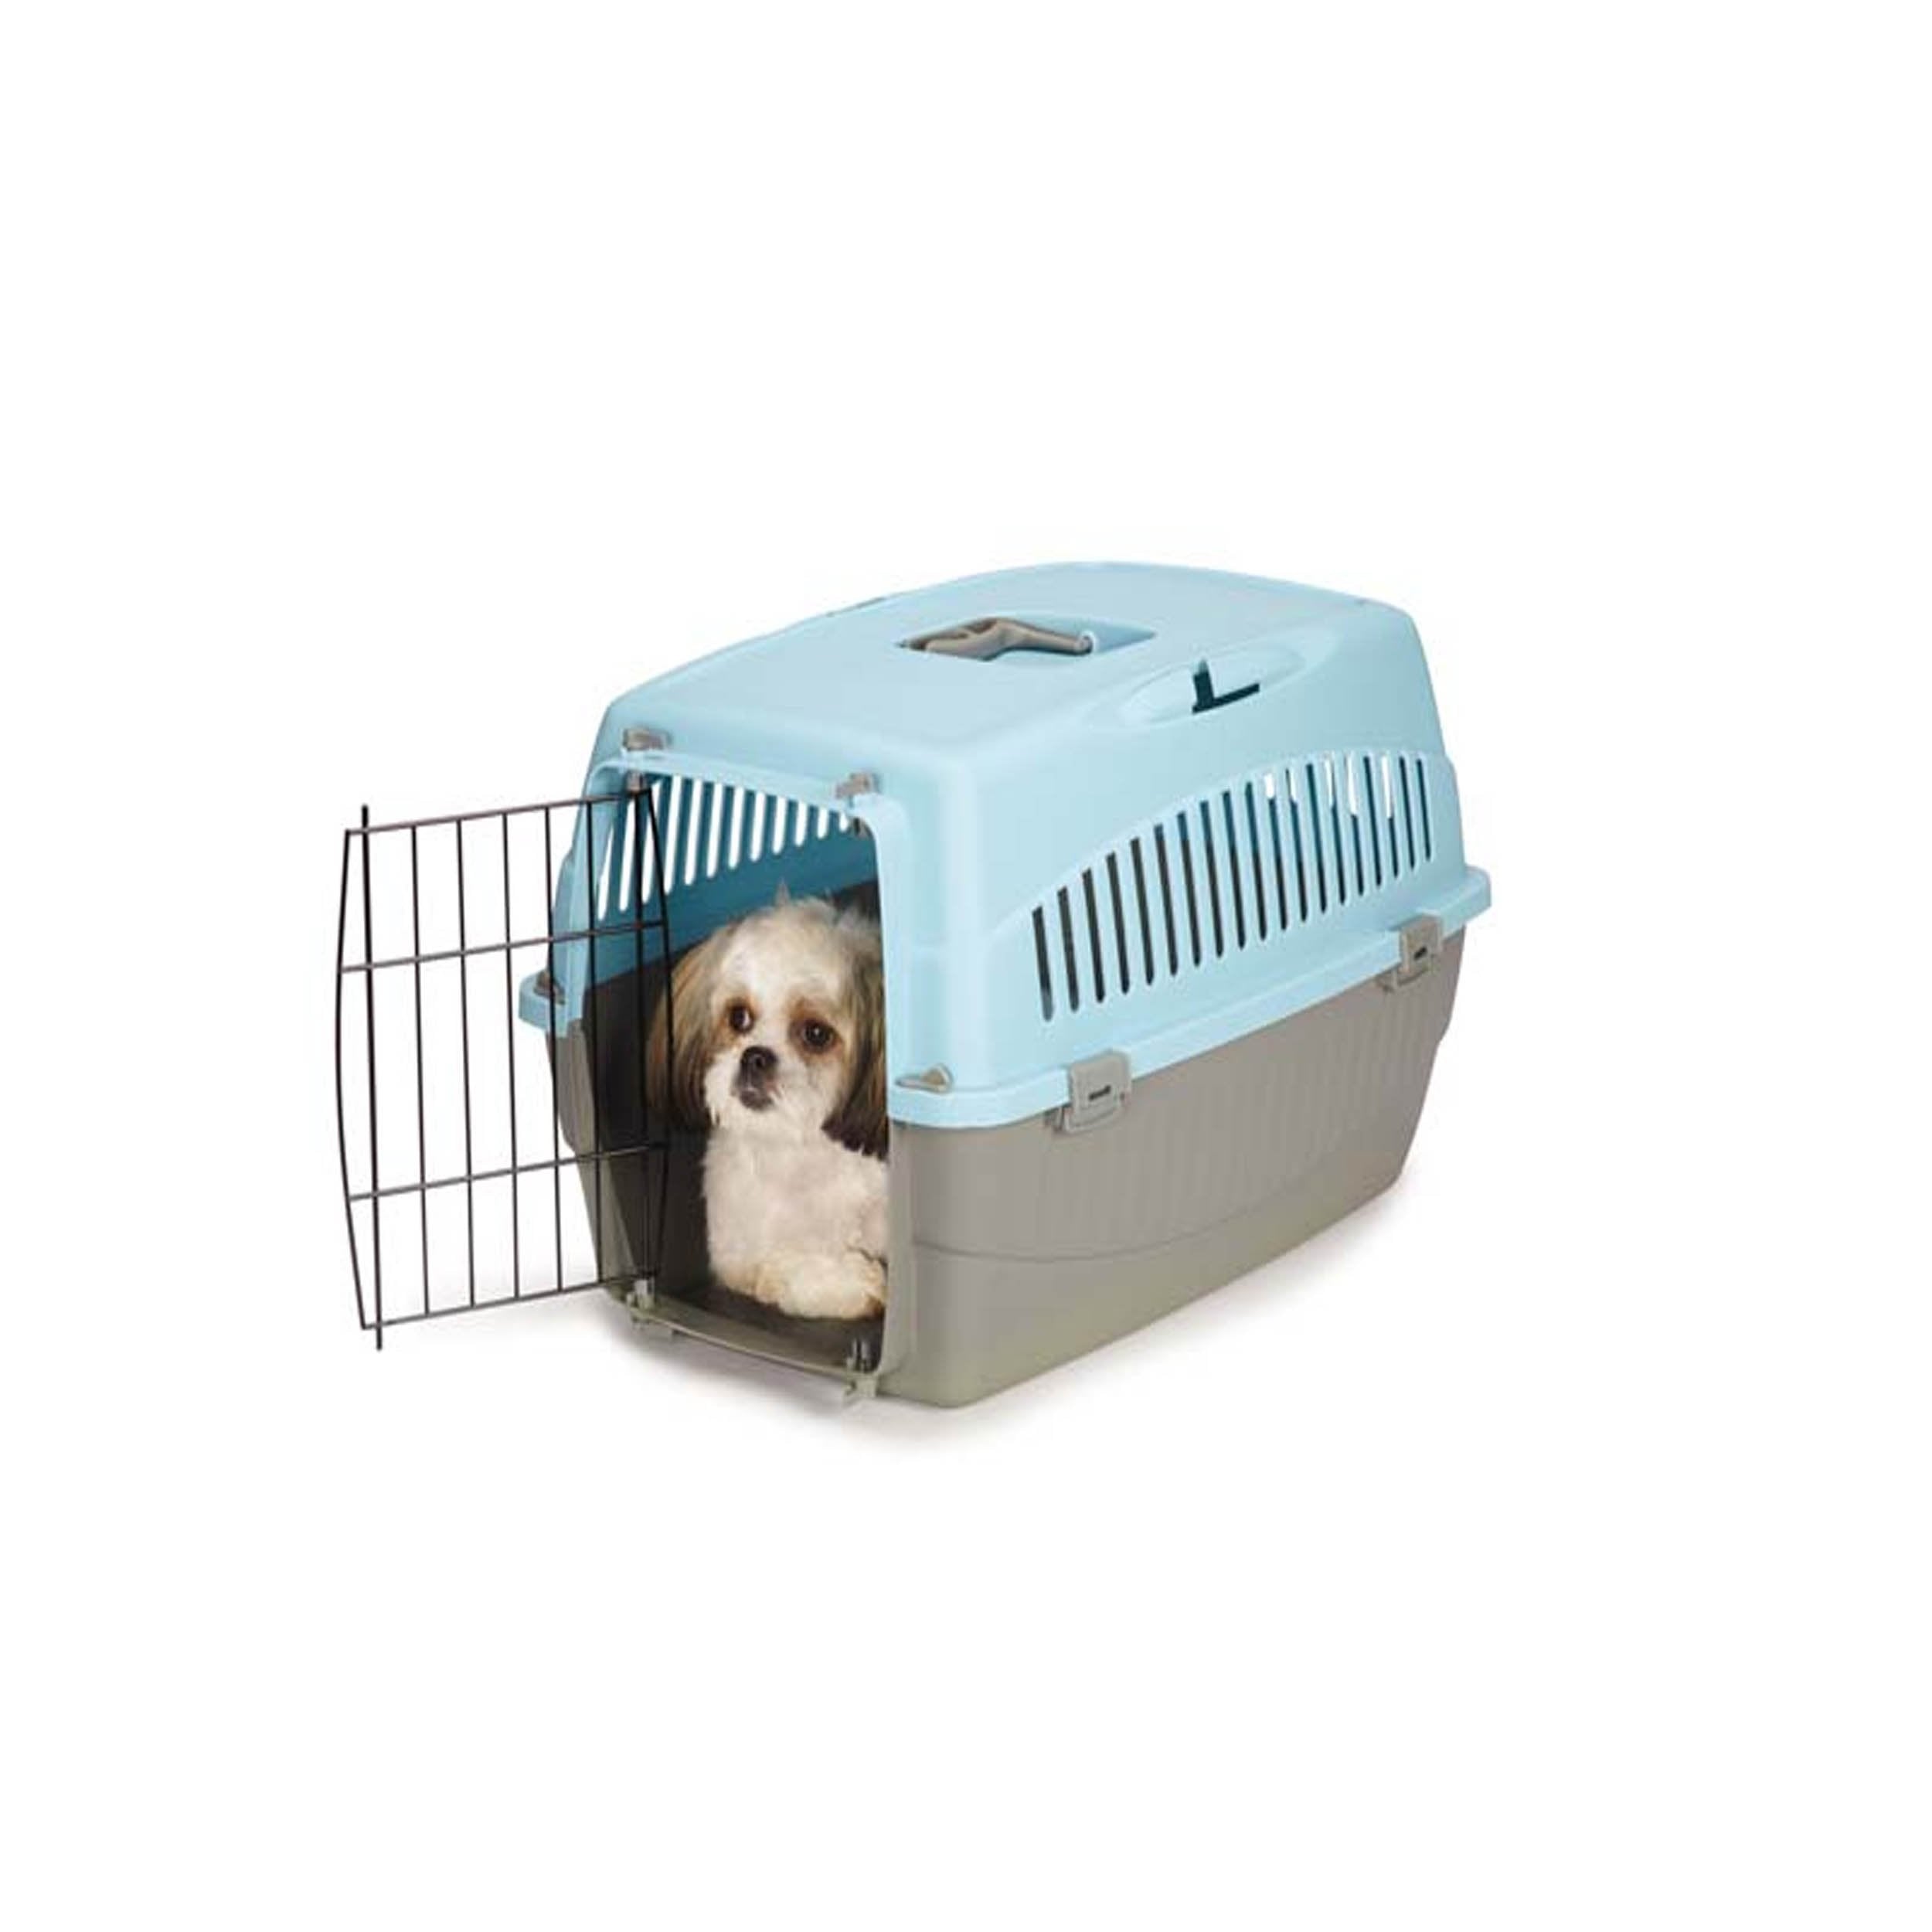 Cruising Companion Carry Me Pet Crate variety Of colors Pink, Orange, Green, Blue with grey base. Crate is extra comfortable and perfectly beathable. Intended use for travel, vet visits, or car rides. Sizes vary in only small and medium. Image model shitzu inside Medium Blue Crate 